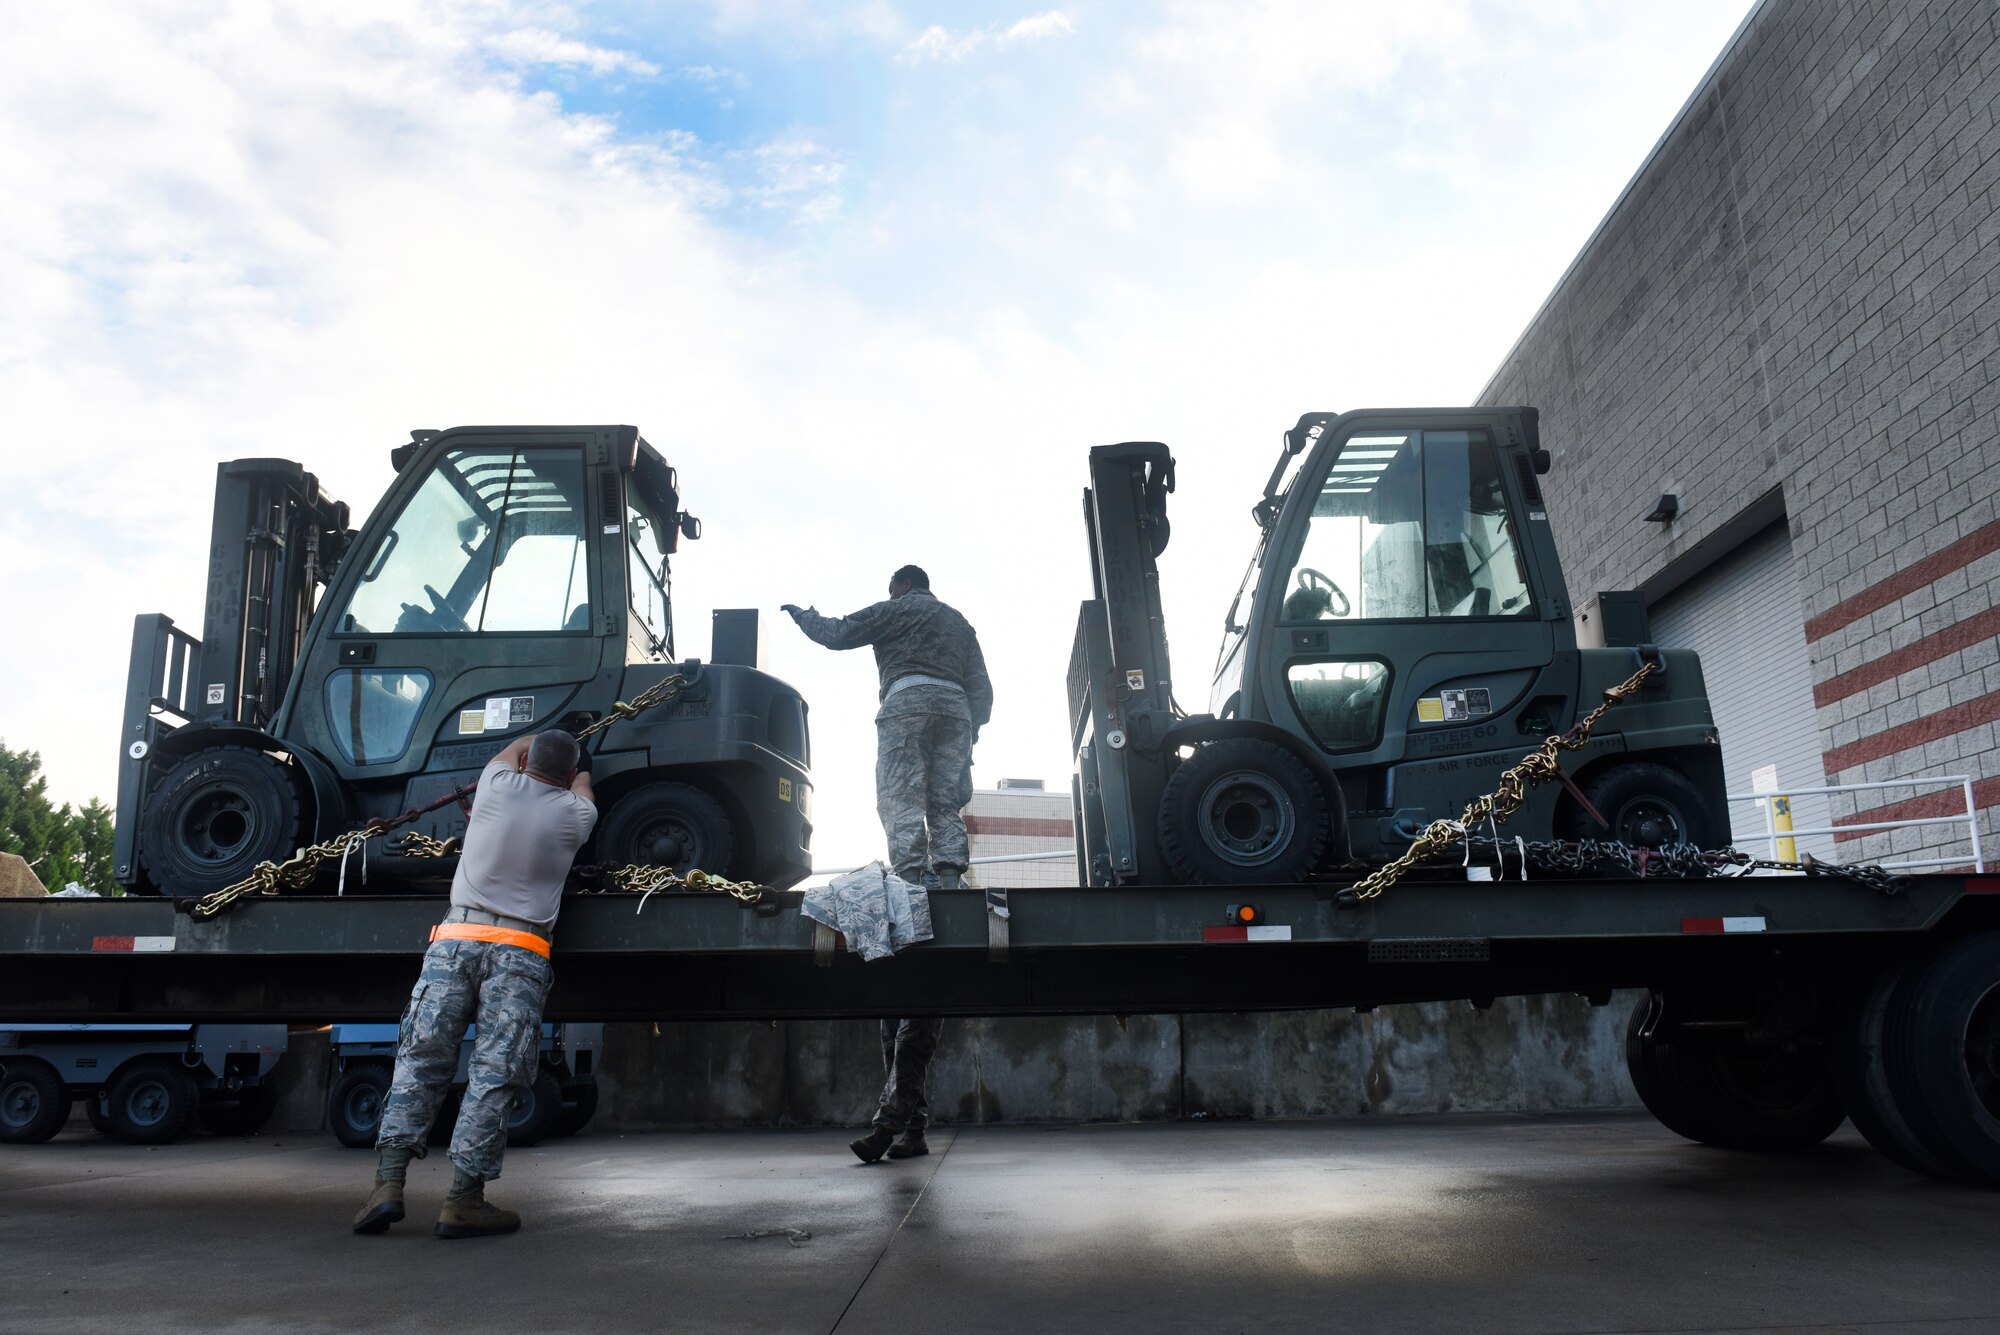 U.S. Air Force Senior Master Sgt. Raymond Graves III (left) and Master Sgt. Barry Boyd (middle), 145th Logistics Readiness Squadron, chain down two forklifts to a flatbed truck at the North Carolina (N.C.) Air National Guard Base, Charlotte Douglas International Airport, Sept.17, 2018.  The forklifts will be used to move pallets filled with supplies like food and water in an attempt to assist in relief efforts associated with Hurricane Florence, and will be transported with an 11-person team to an airport in Kinston, N.C.